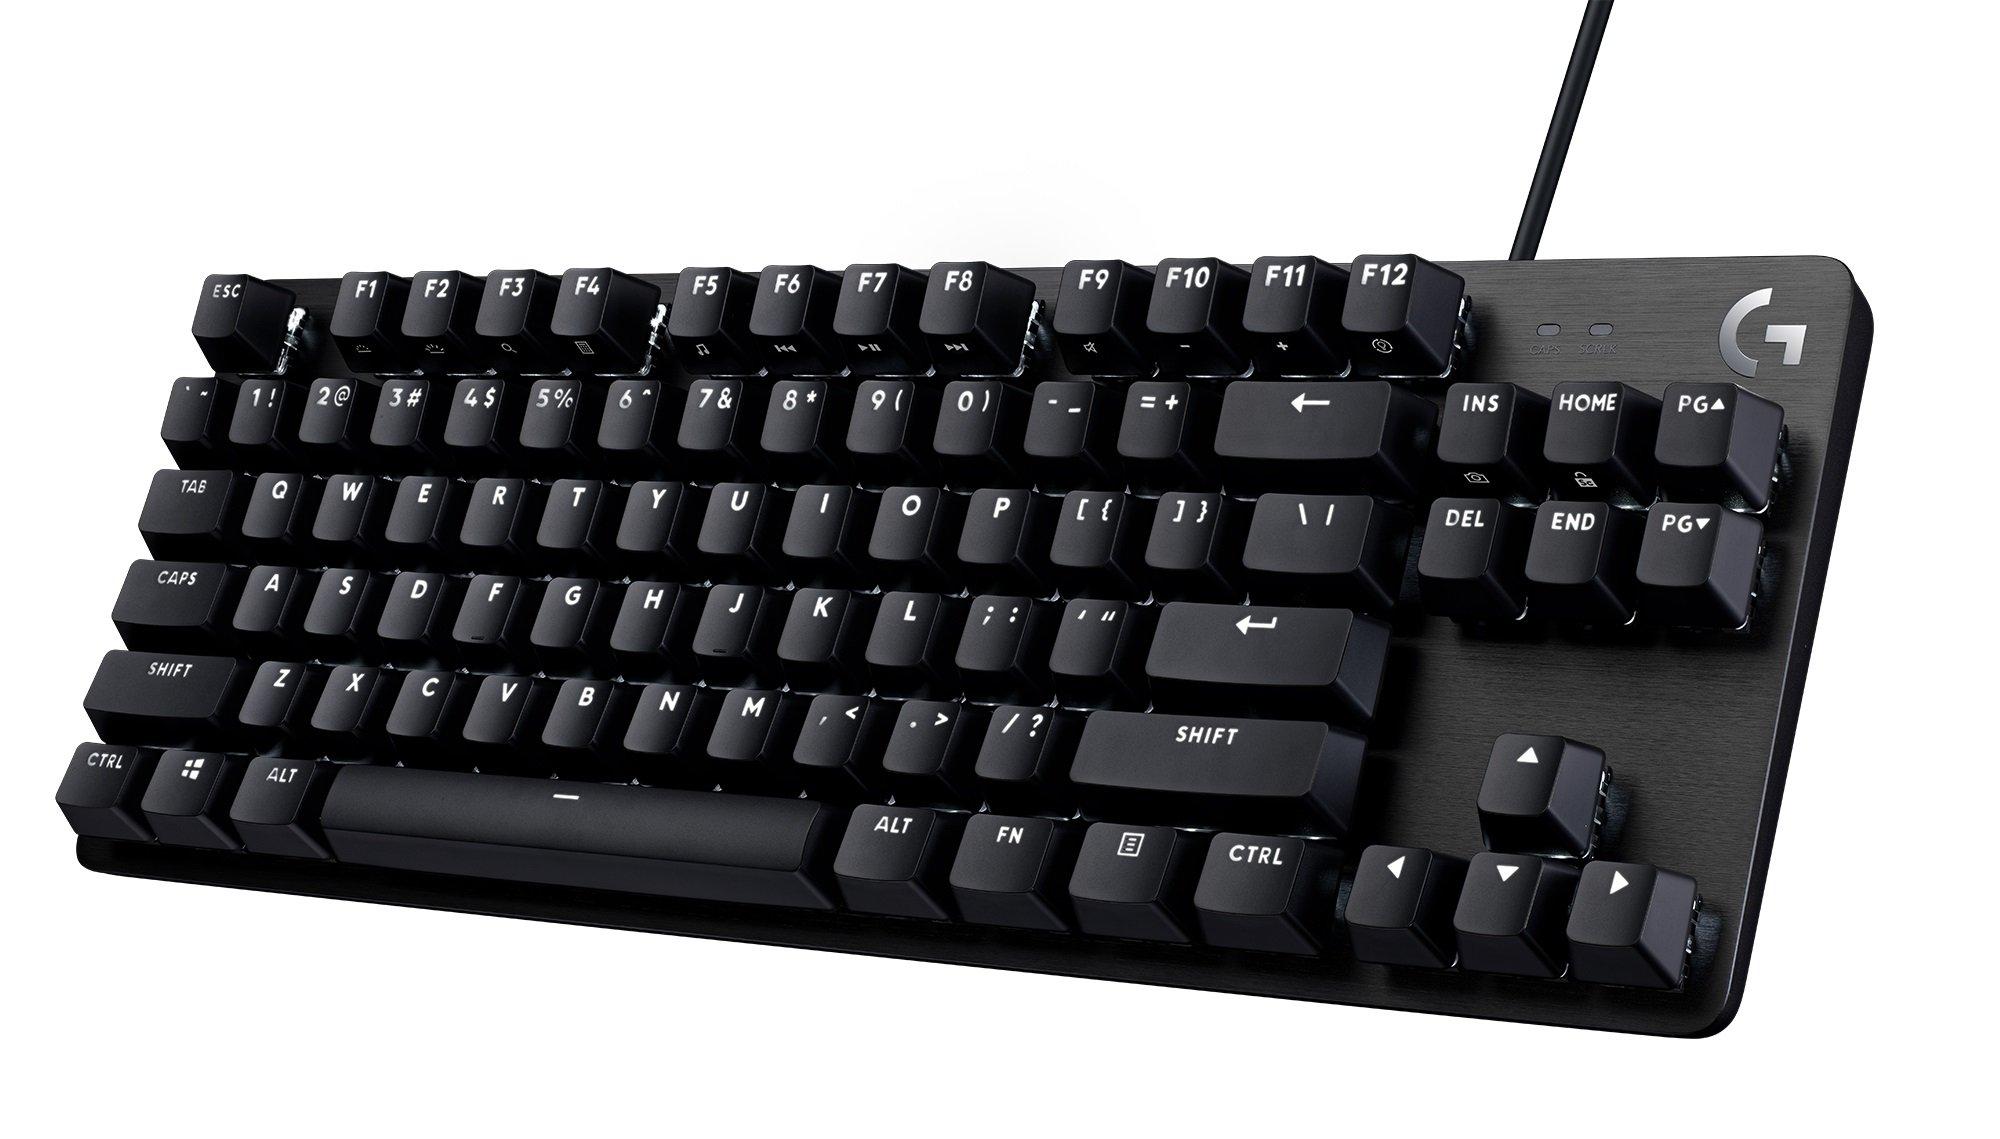  Logitech G413 TKL SE Mechanical Gaming Keyboard - Compact  Backlit Keyboard with Tactile Mechanical Switches, Anti-Ghosting,  Compatible with Windows, macOS - Black Aluminum : Video Games